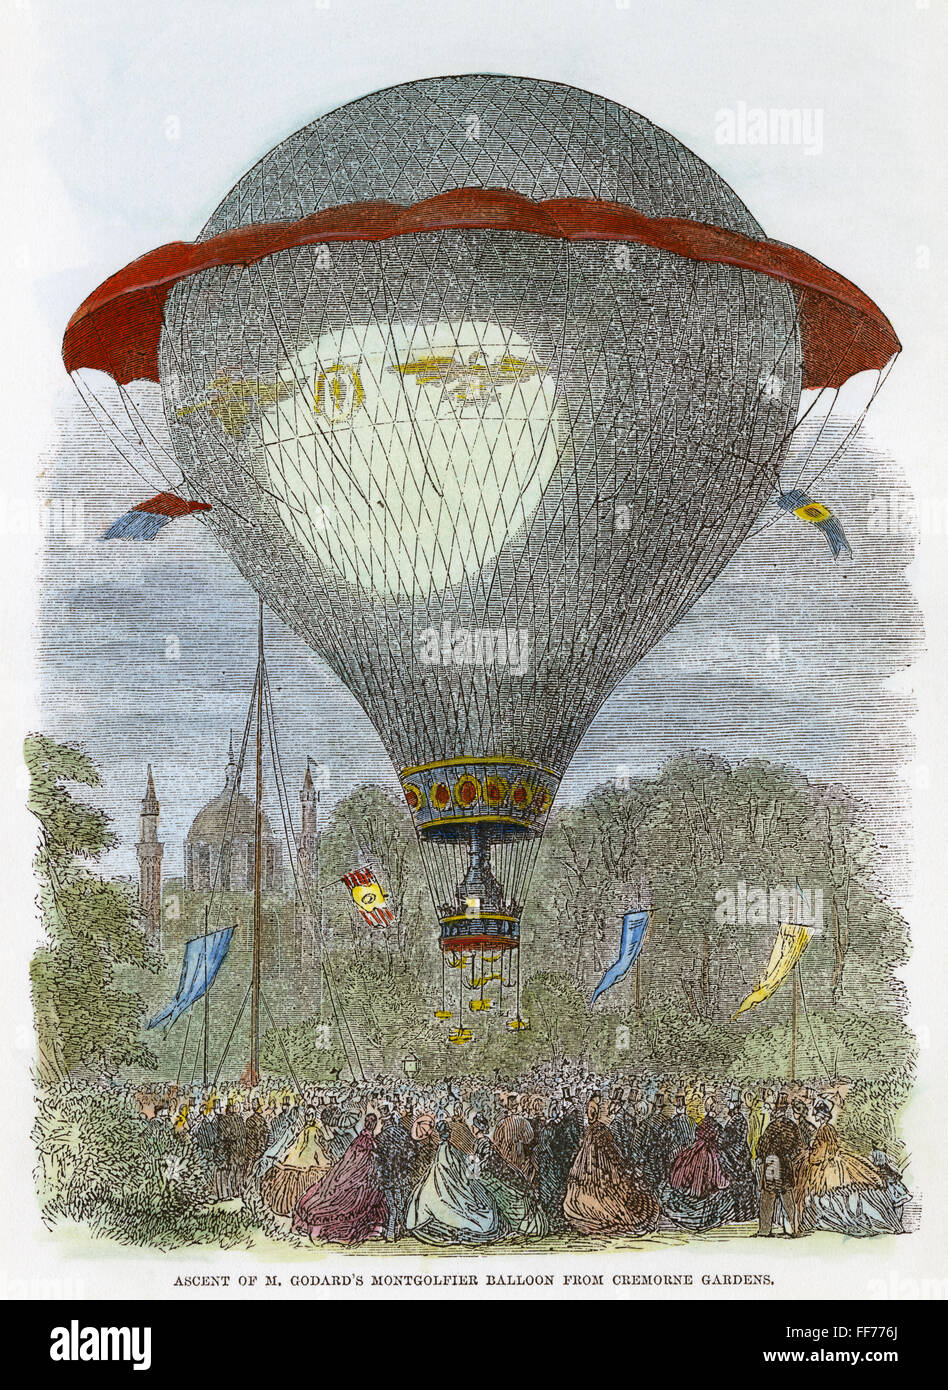 MONTGOLFIER BALLOON, 1864. /nAscent of M. Godard's Montgolfier Balloon from Cremorne Gardens. Wood engraving from an English Newspaper, 1864. Stock Photo